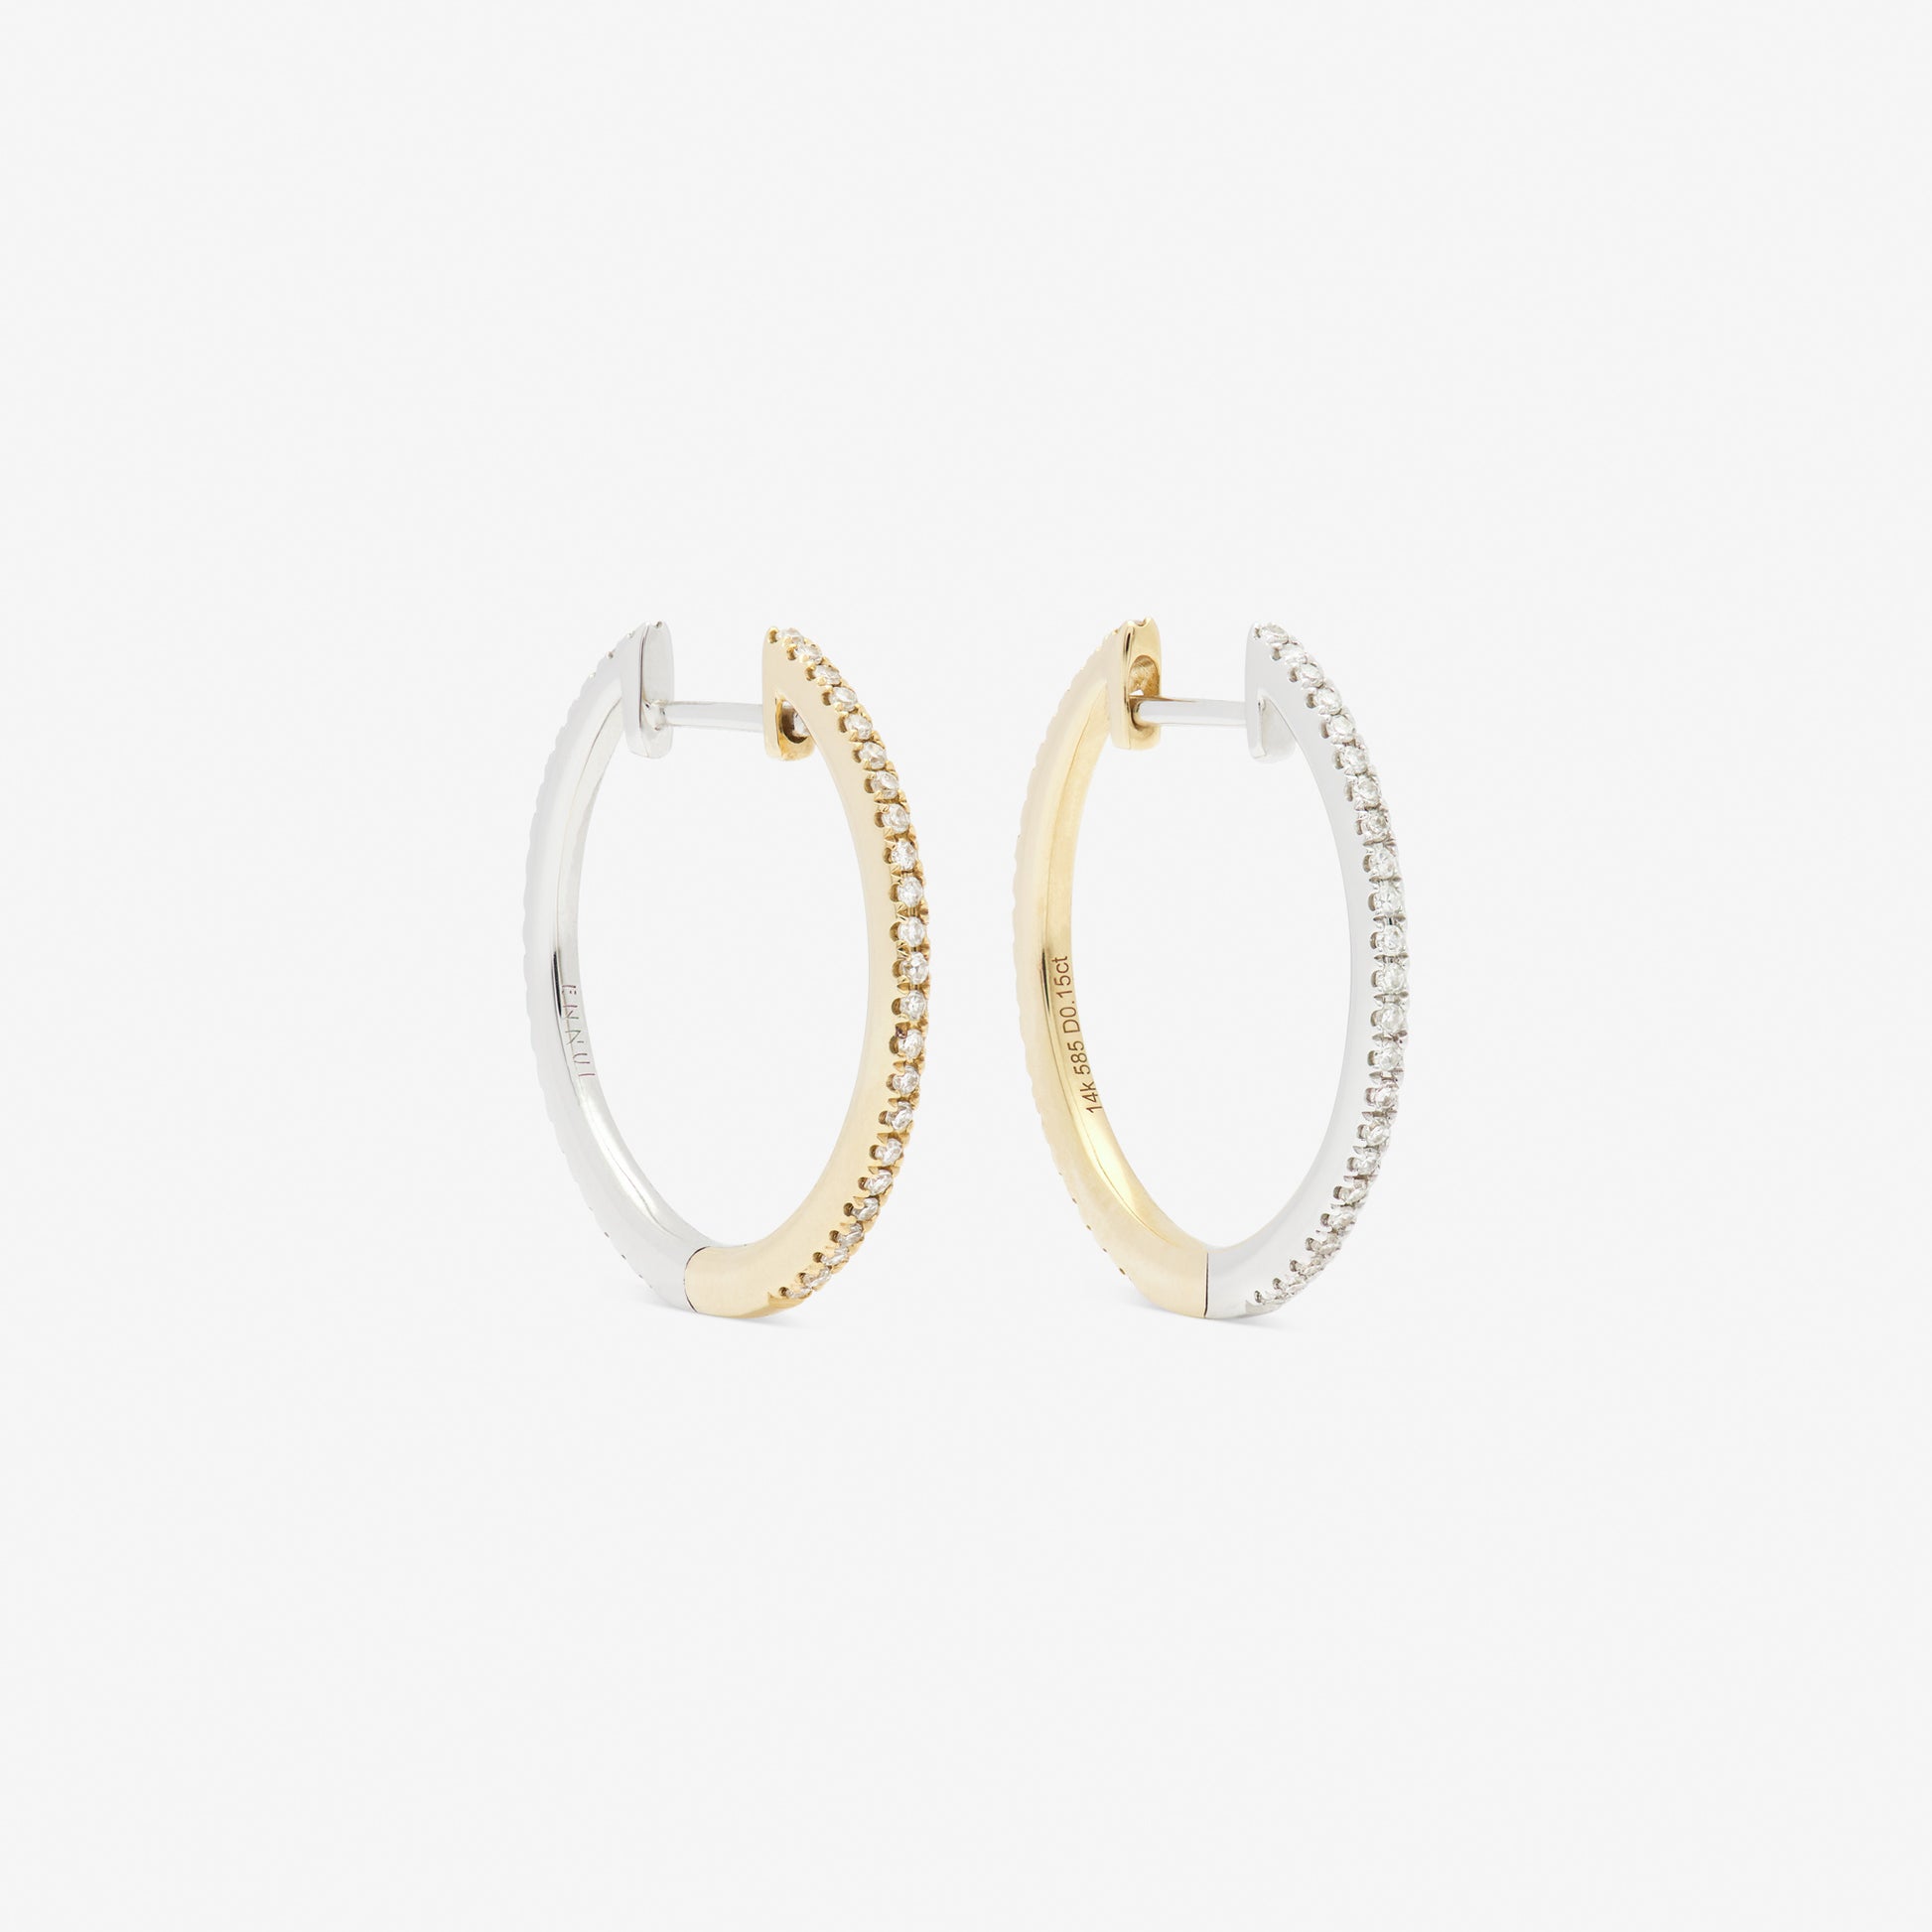 20mm hoop pair in white and yellow gold